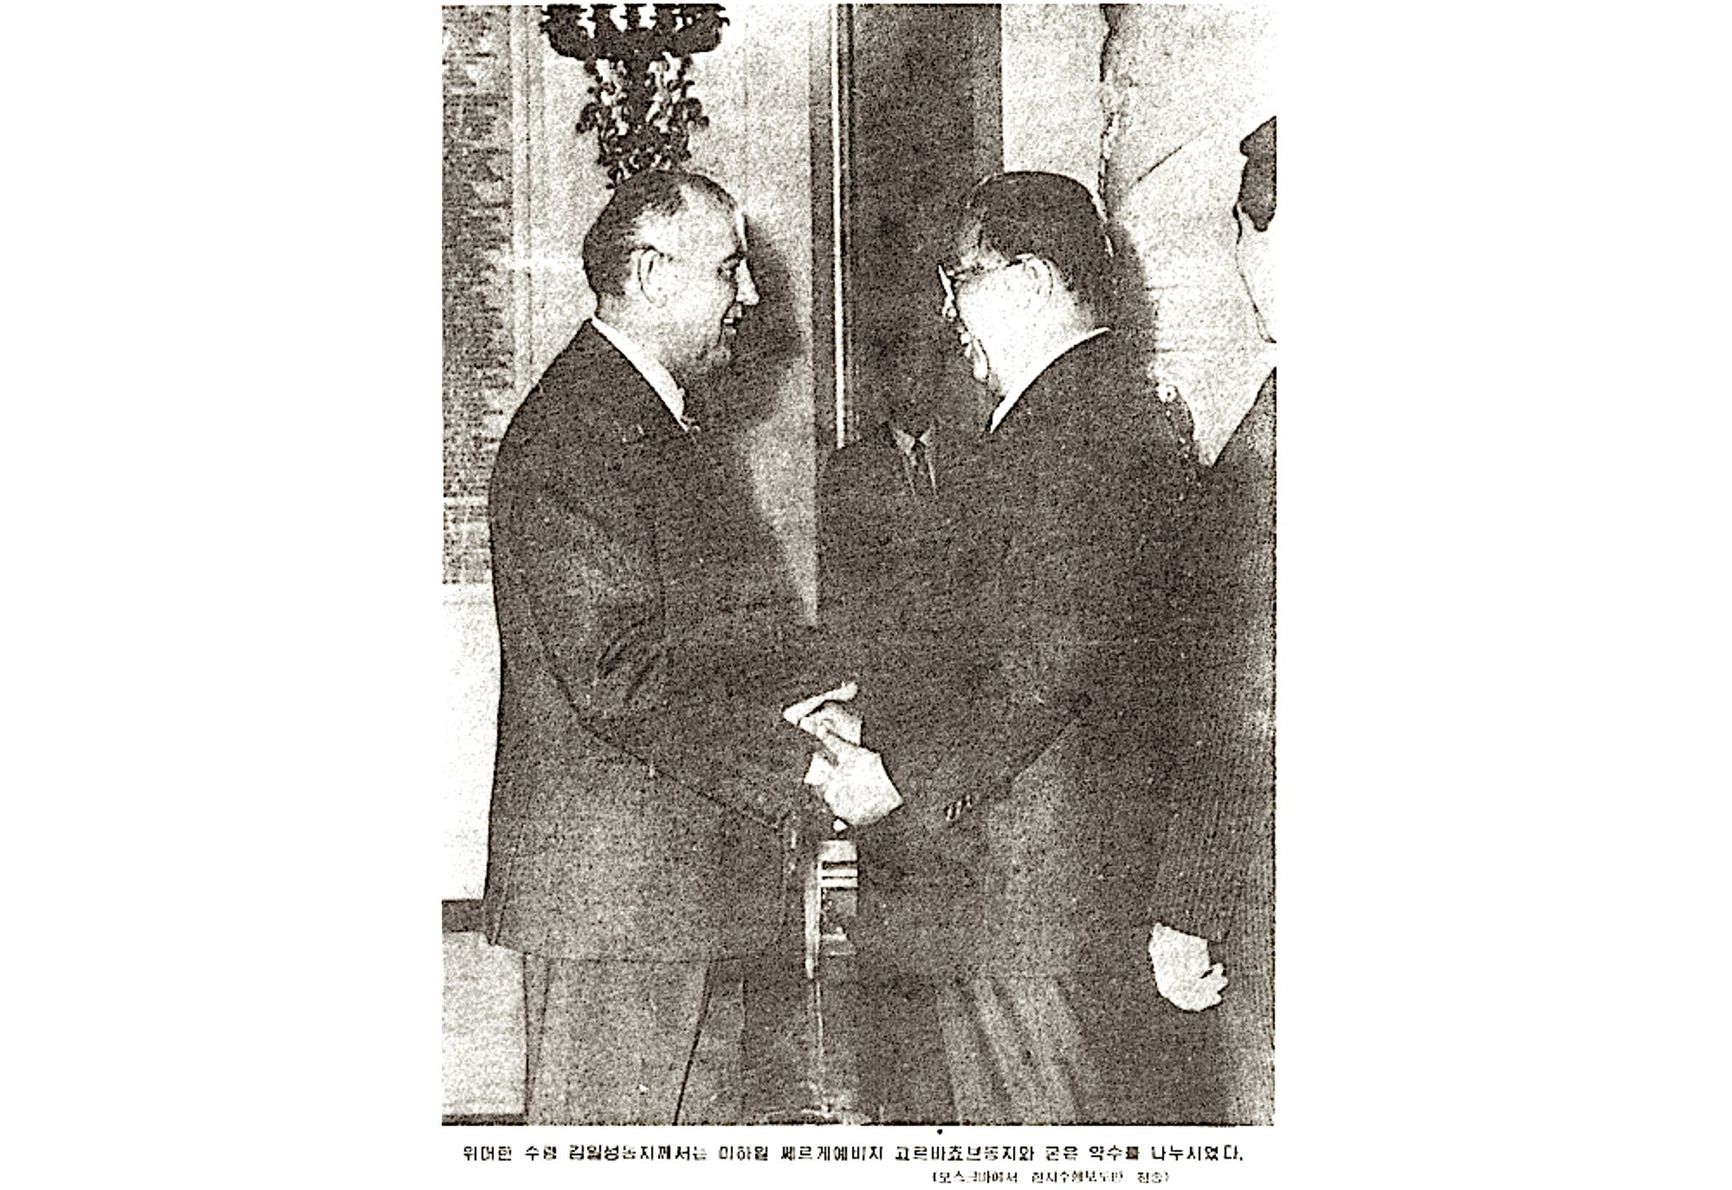 A meeting between Kim Il Sung and Soviet leader Mikhail Gorbachev. The caption reads “Great Leader Comrade Kim Il Sung exchanged a firm handshake with Comrade Mikhail Sergeyevich Gorbachev.” In today's North Korea, any images depicting the leader together with “traitor to socialism Gorbachev” are banned